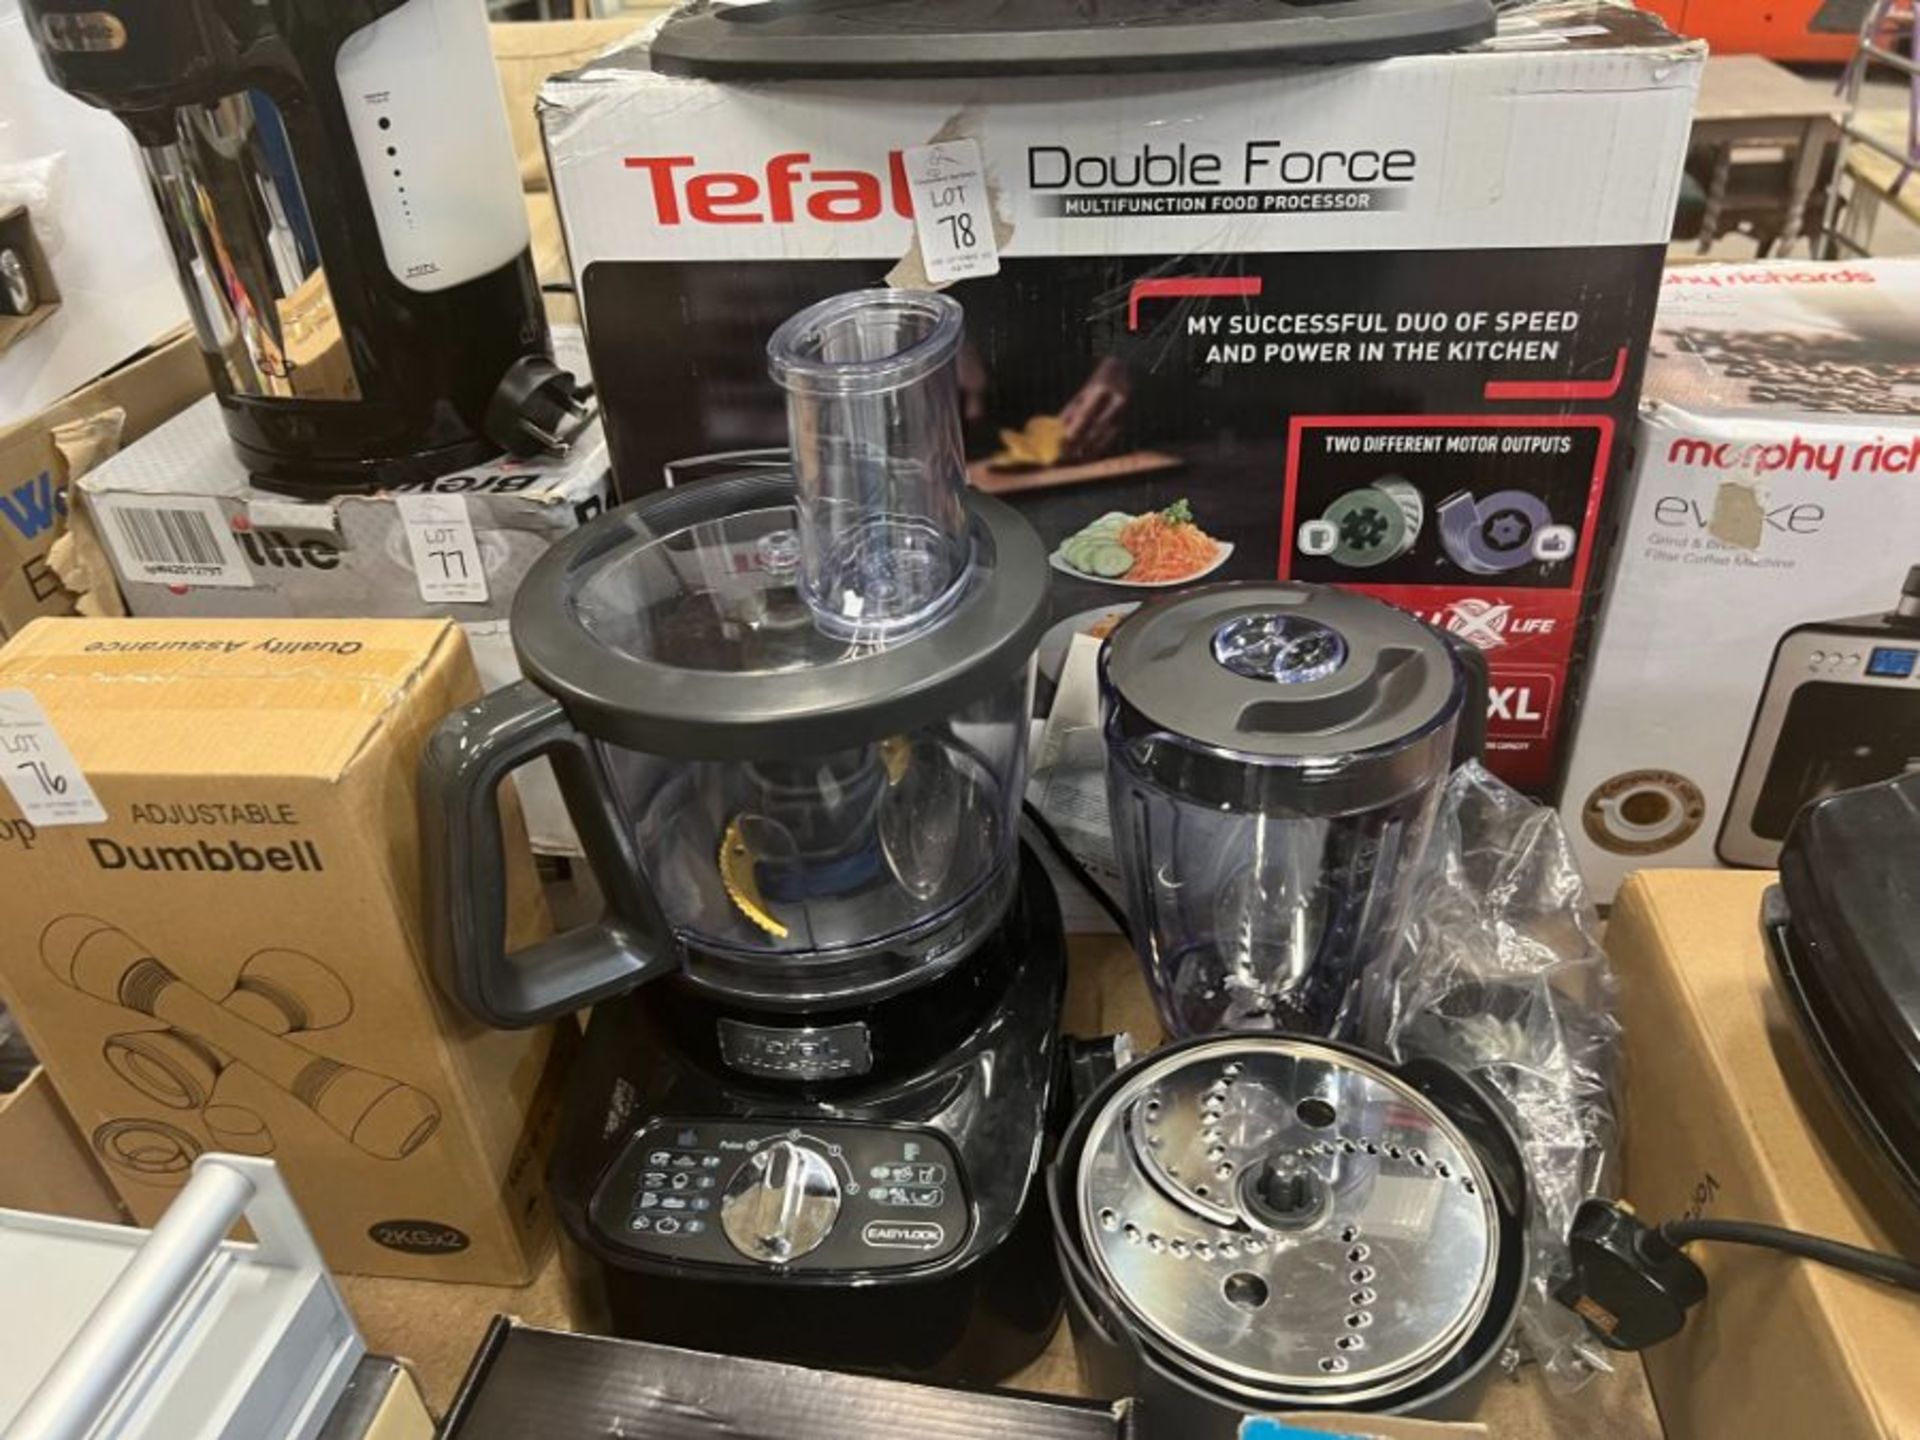 TEFAL DOUBLE FORCE MULTIFUNCTIONAL FOOD PROCESSOR (WORKING)